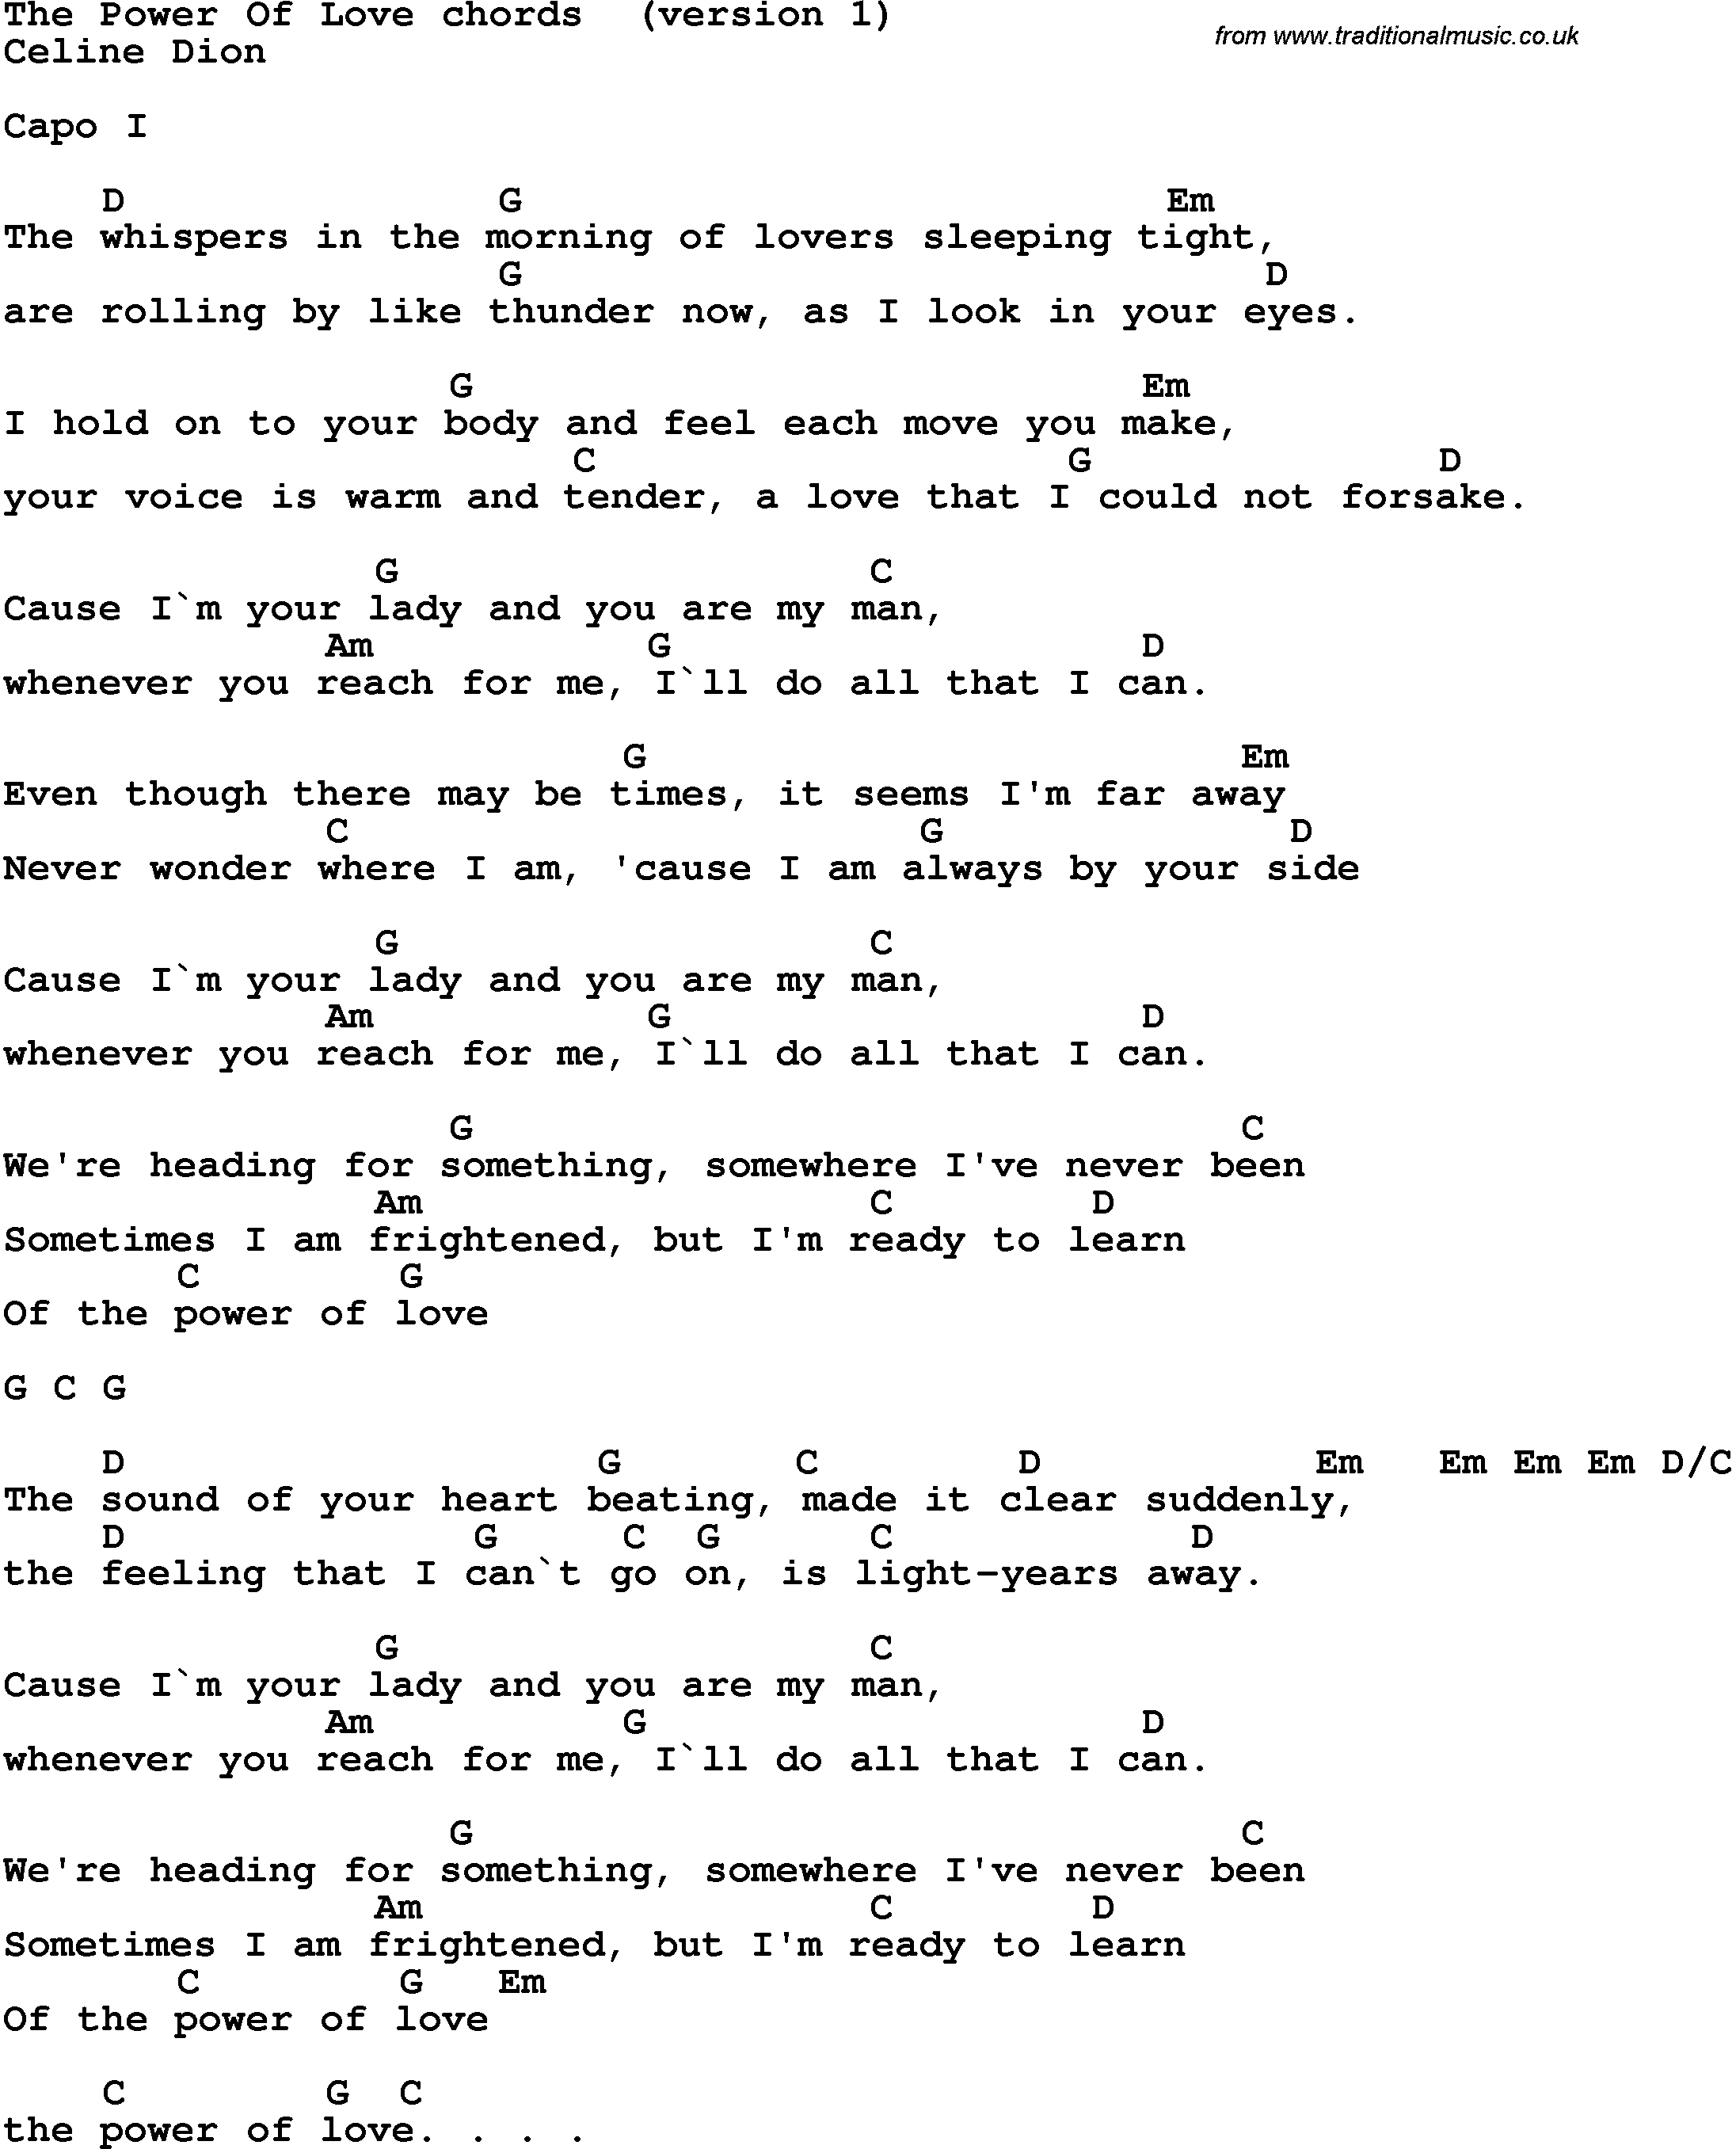 Song Lyrics with guitar chords for The Power Of Love - Celine Dion